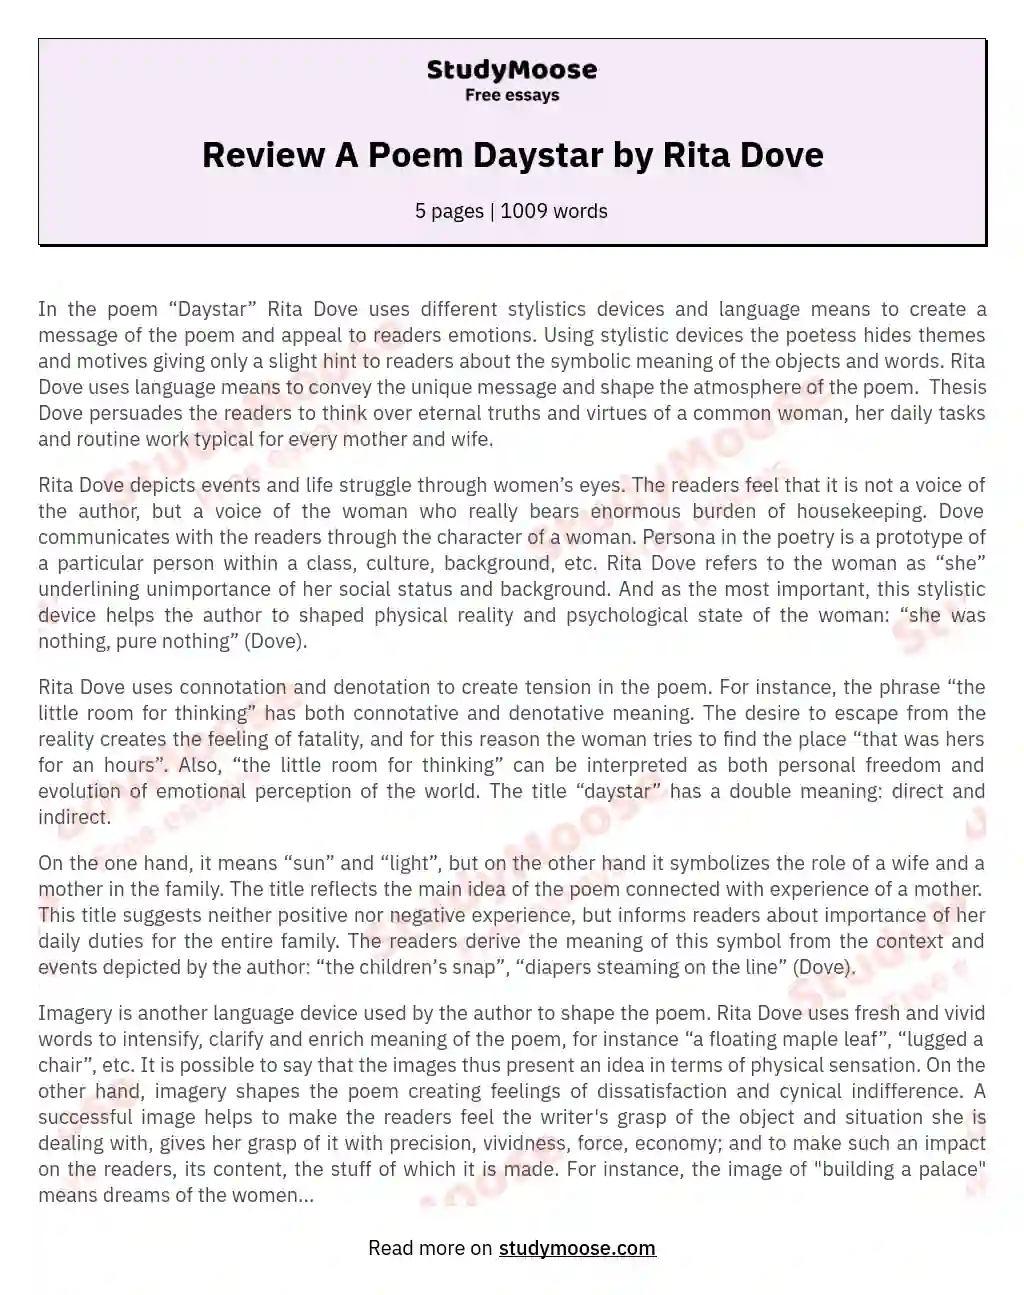 Review A Poem Daystar by Rita Dove essay